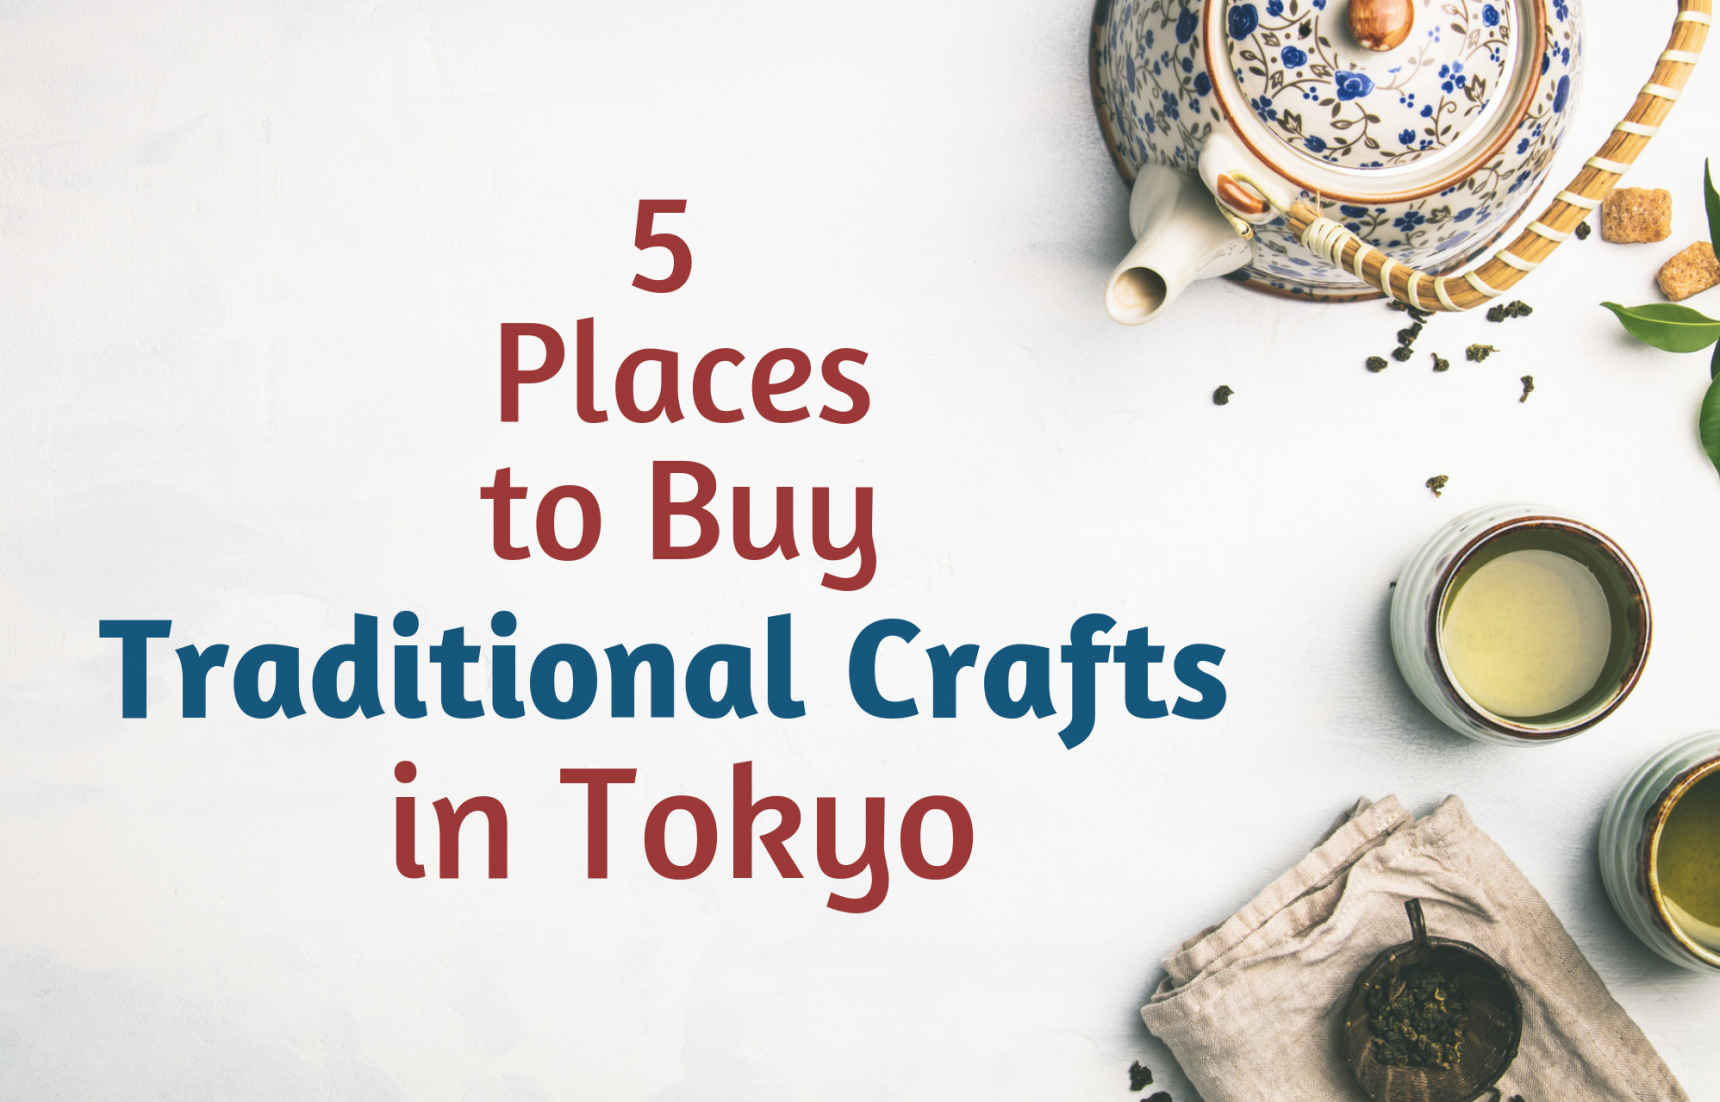 5 Places to Buy Traditional Crafts in Tokyo